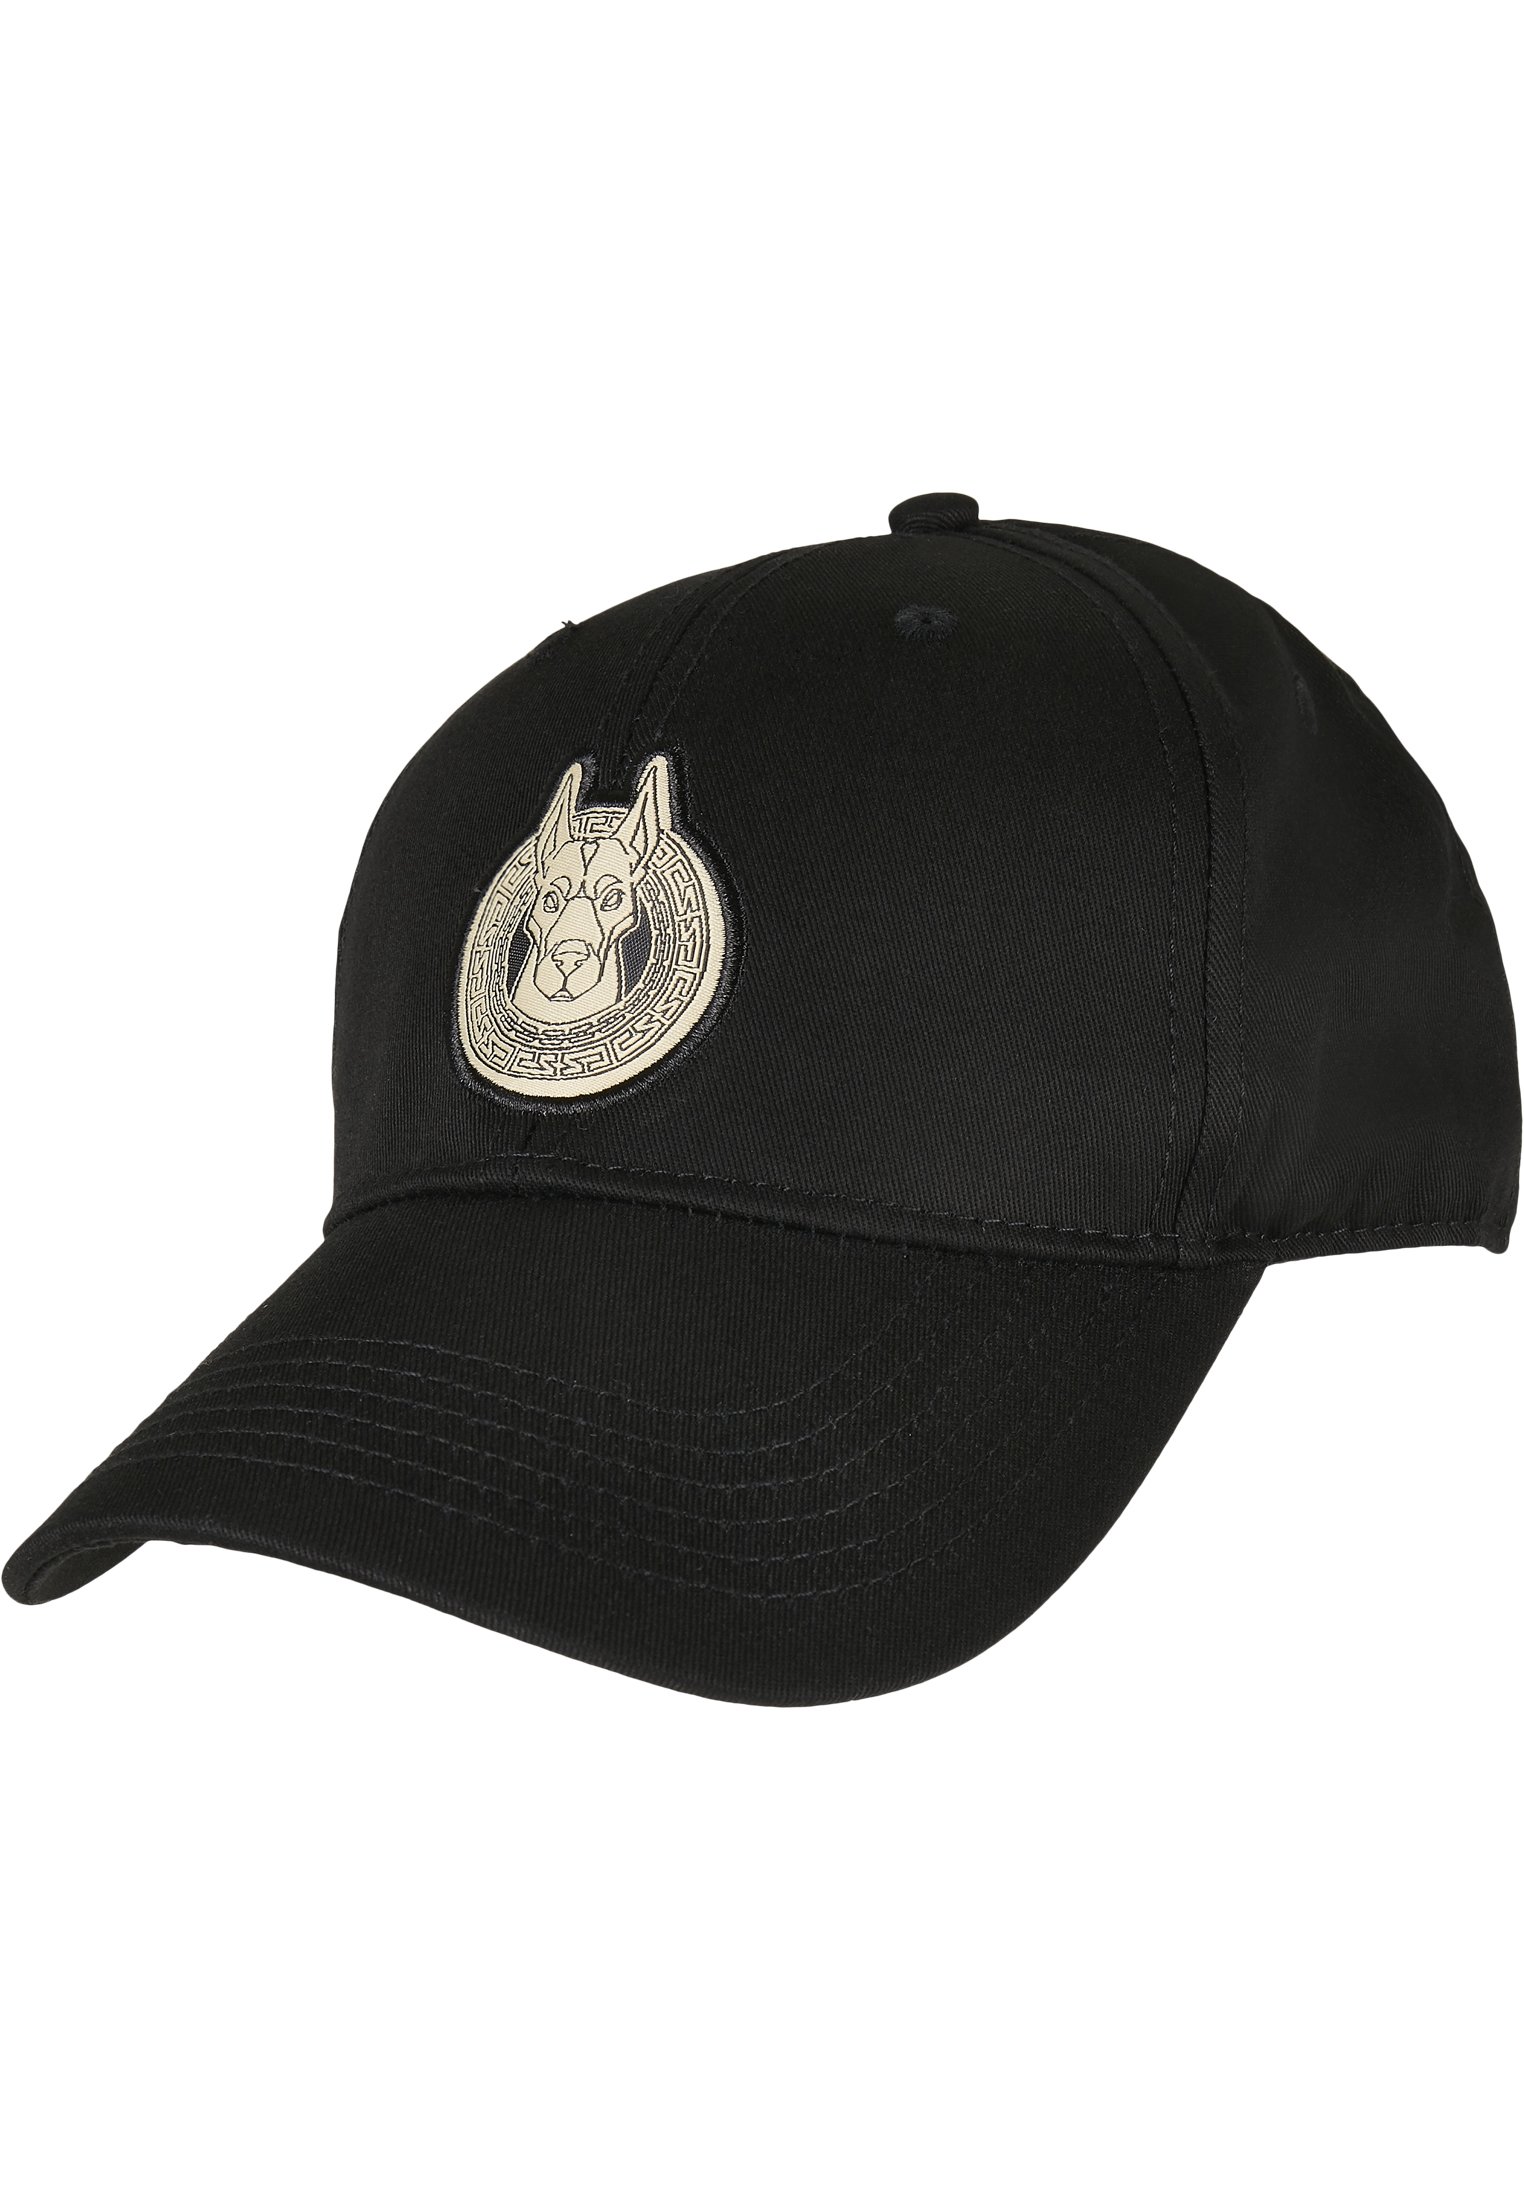 C&S WL Earn Respect Curved Cap